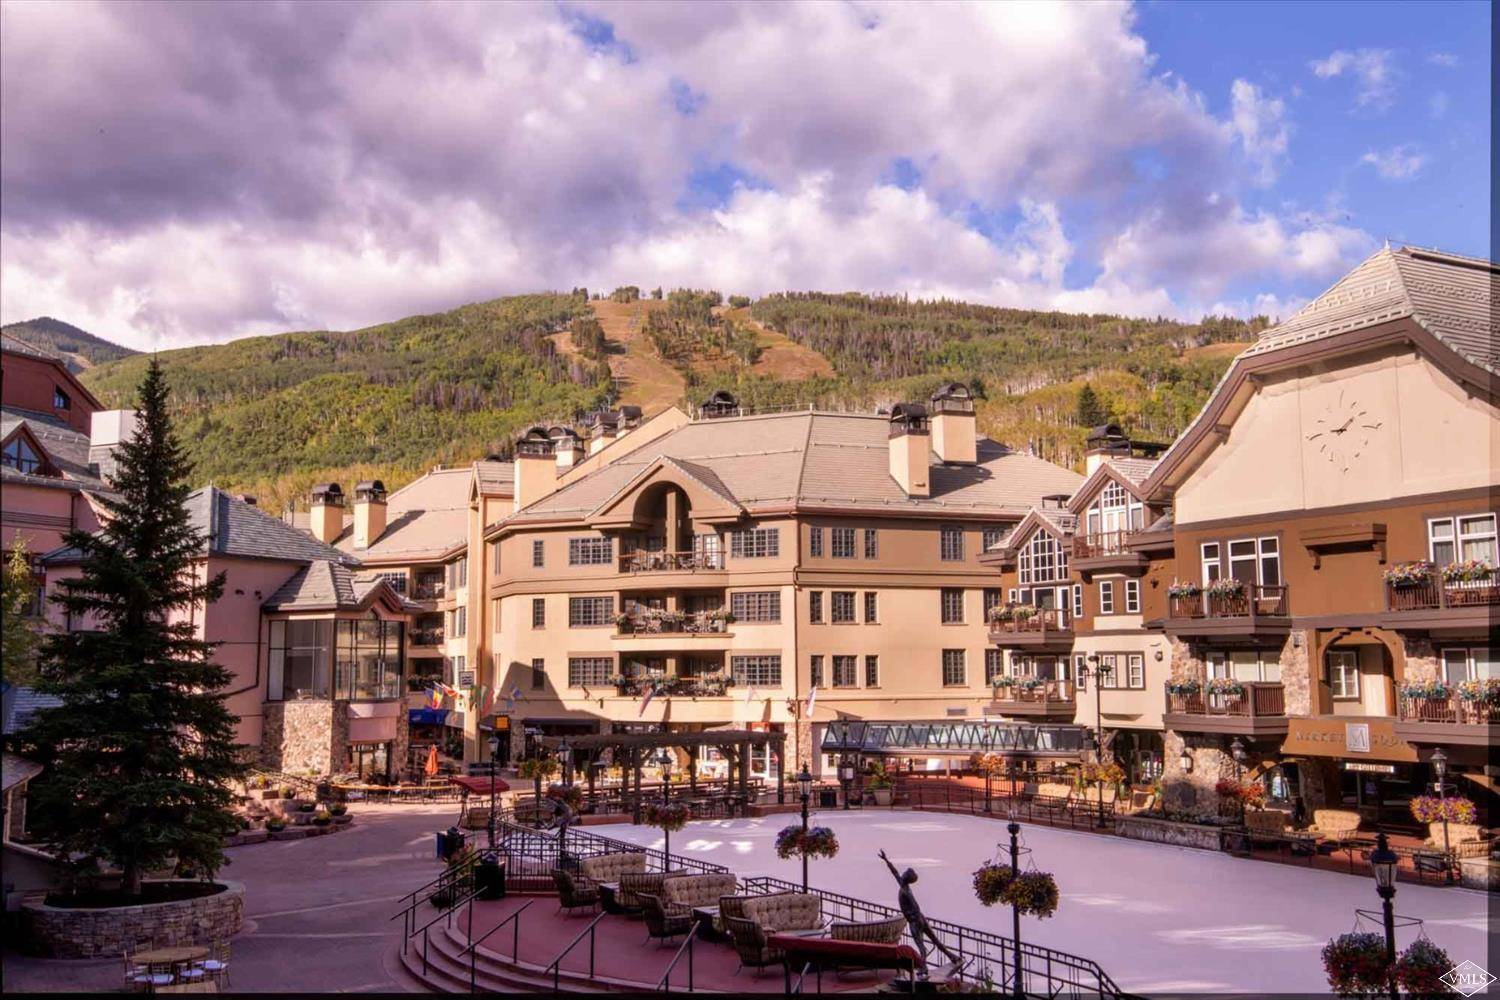 Located in the heart of Beaver Creek Village with a balcony overlooking the village.